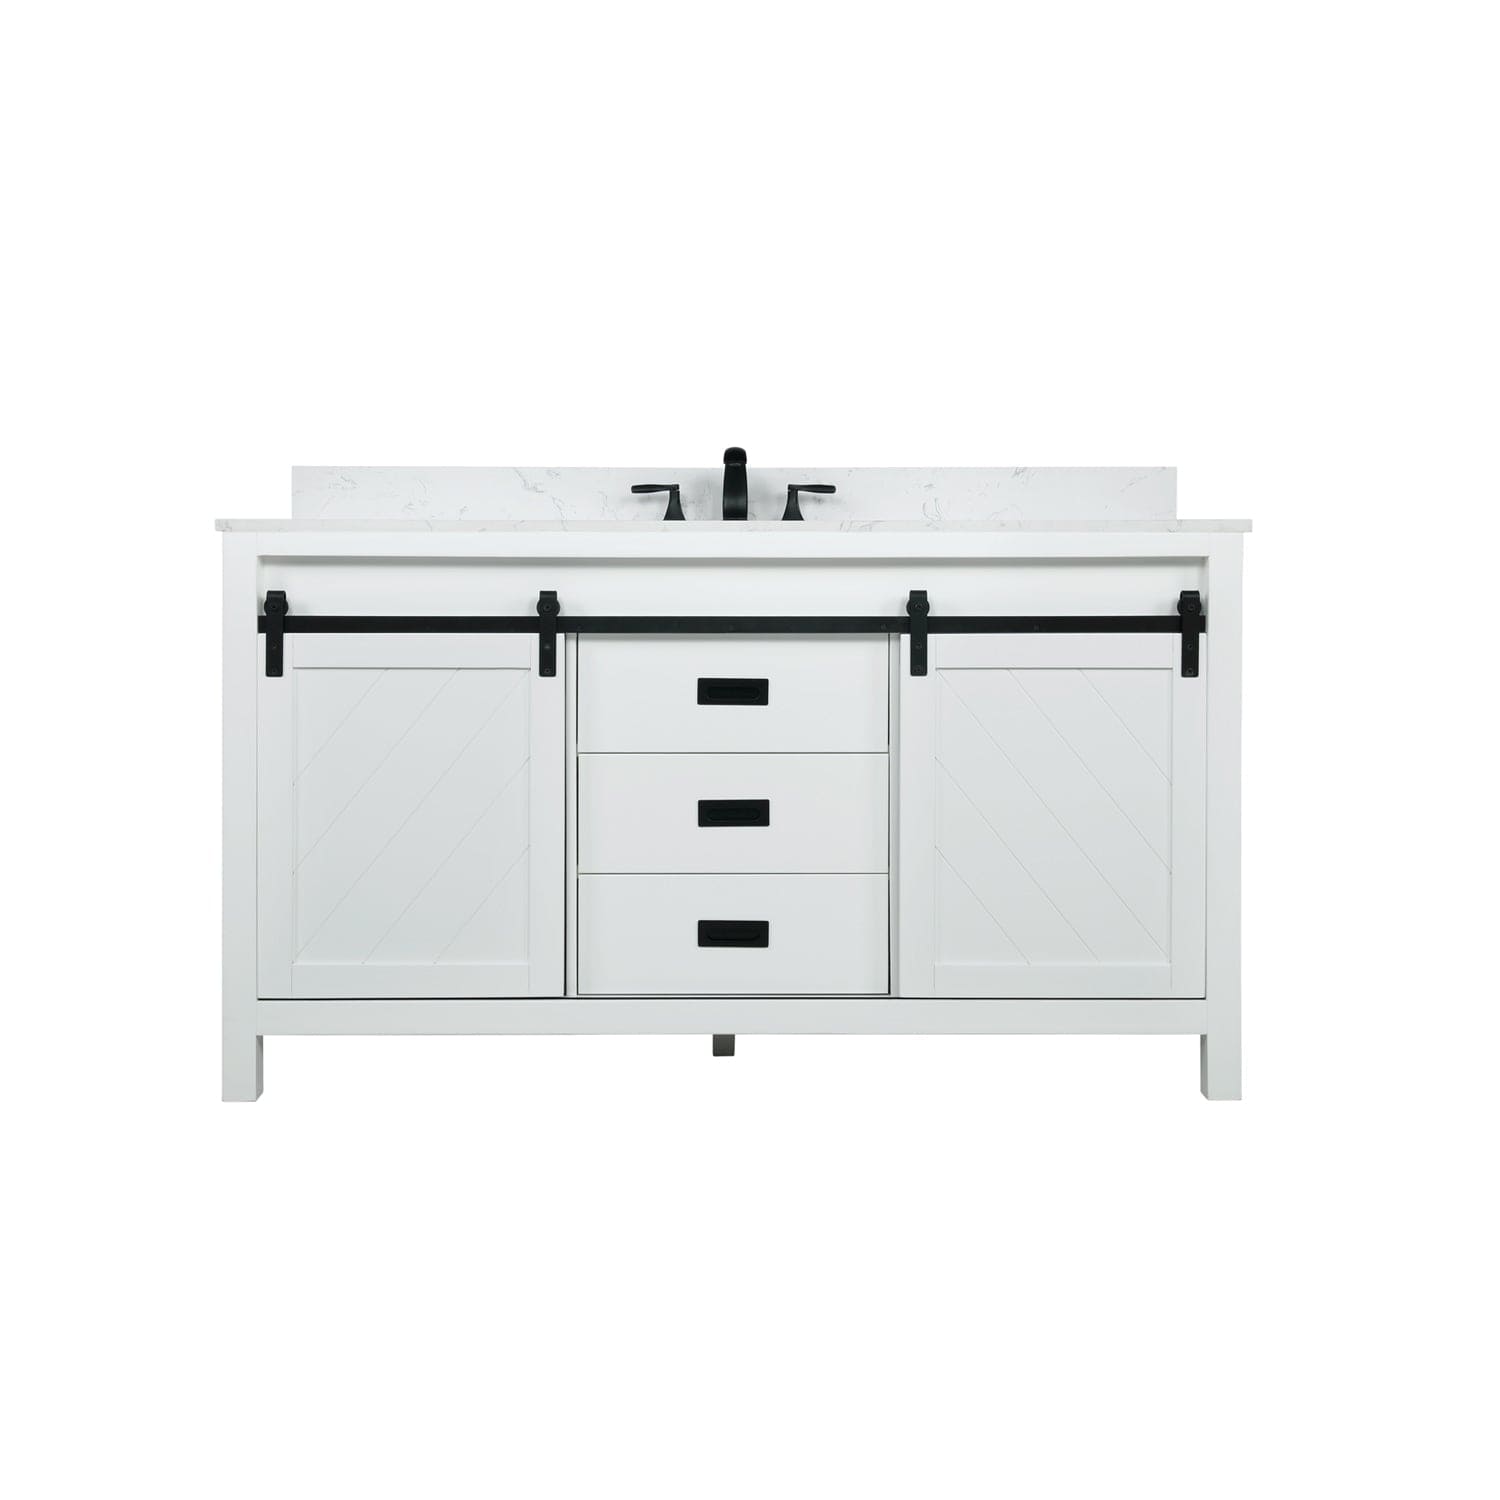 Altair Kinsley 60" Single Bathroom Vanity Set in White and Carrara White Marble Countertop without Mirror 536060S-WH-AW-NM - Molaix696952511284Vanity536060S-WH-AW-NM